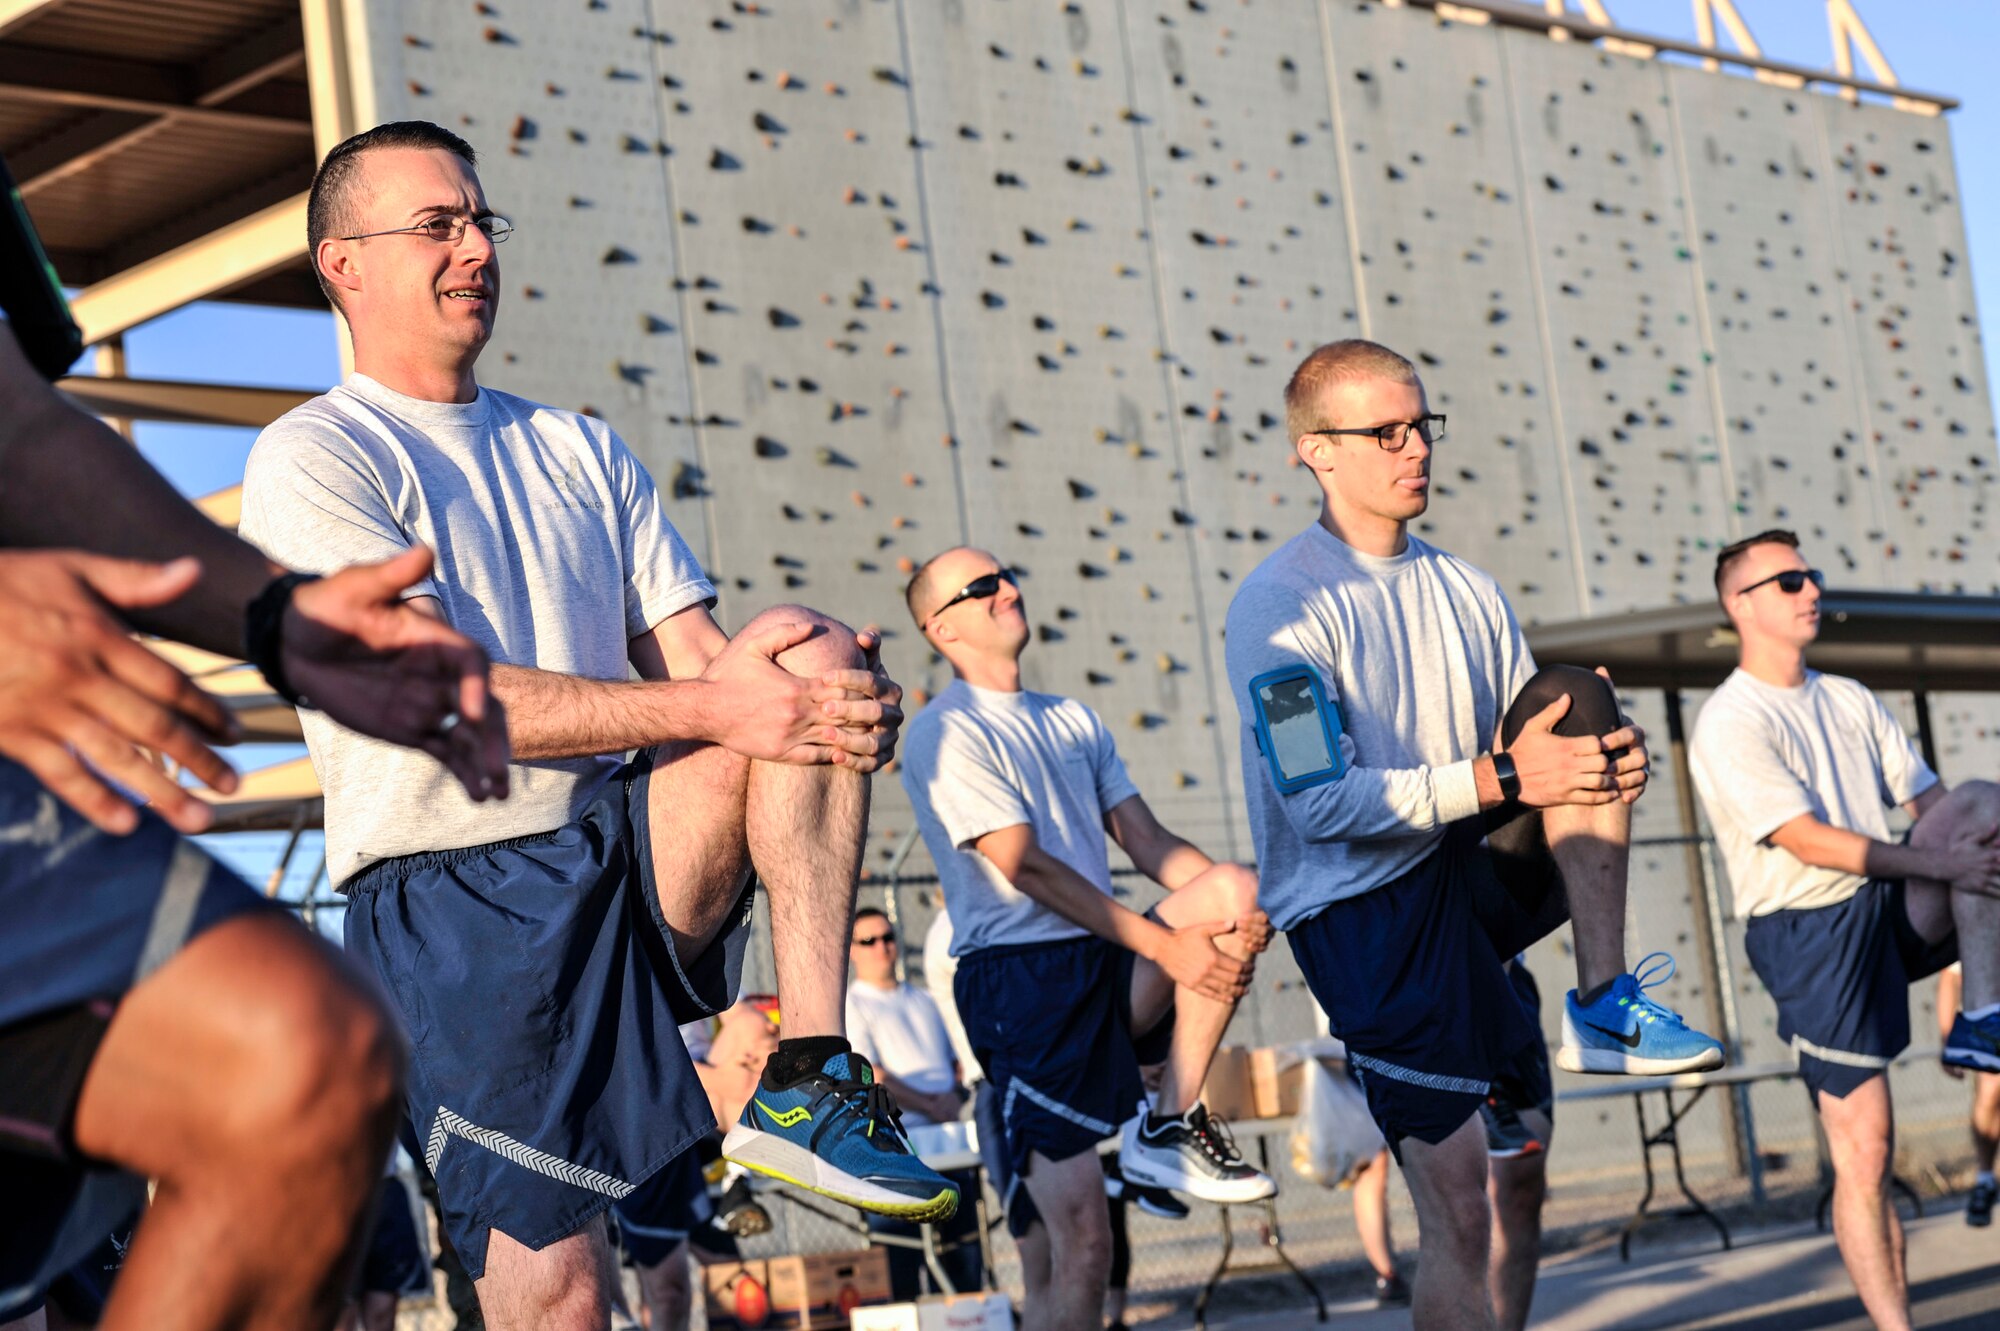 Members of the 377th Air Base Wing stretch to prepare for a Wing Tiger Run at Kirtland Air Force Base, N.M., August 16, 2019.  Wing Tiger Runs are held quarterly to bring different units of the 377th ABW together to increase morale and esprit de corps (U.S. Air Force Photo by Senior Airman Enrique Barcelo).